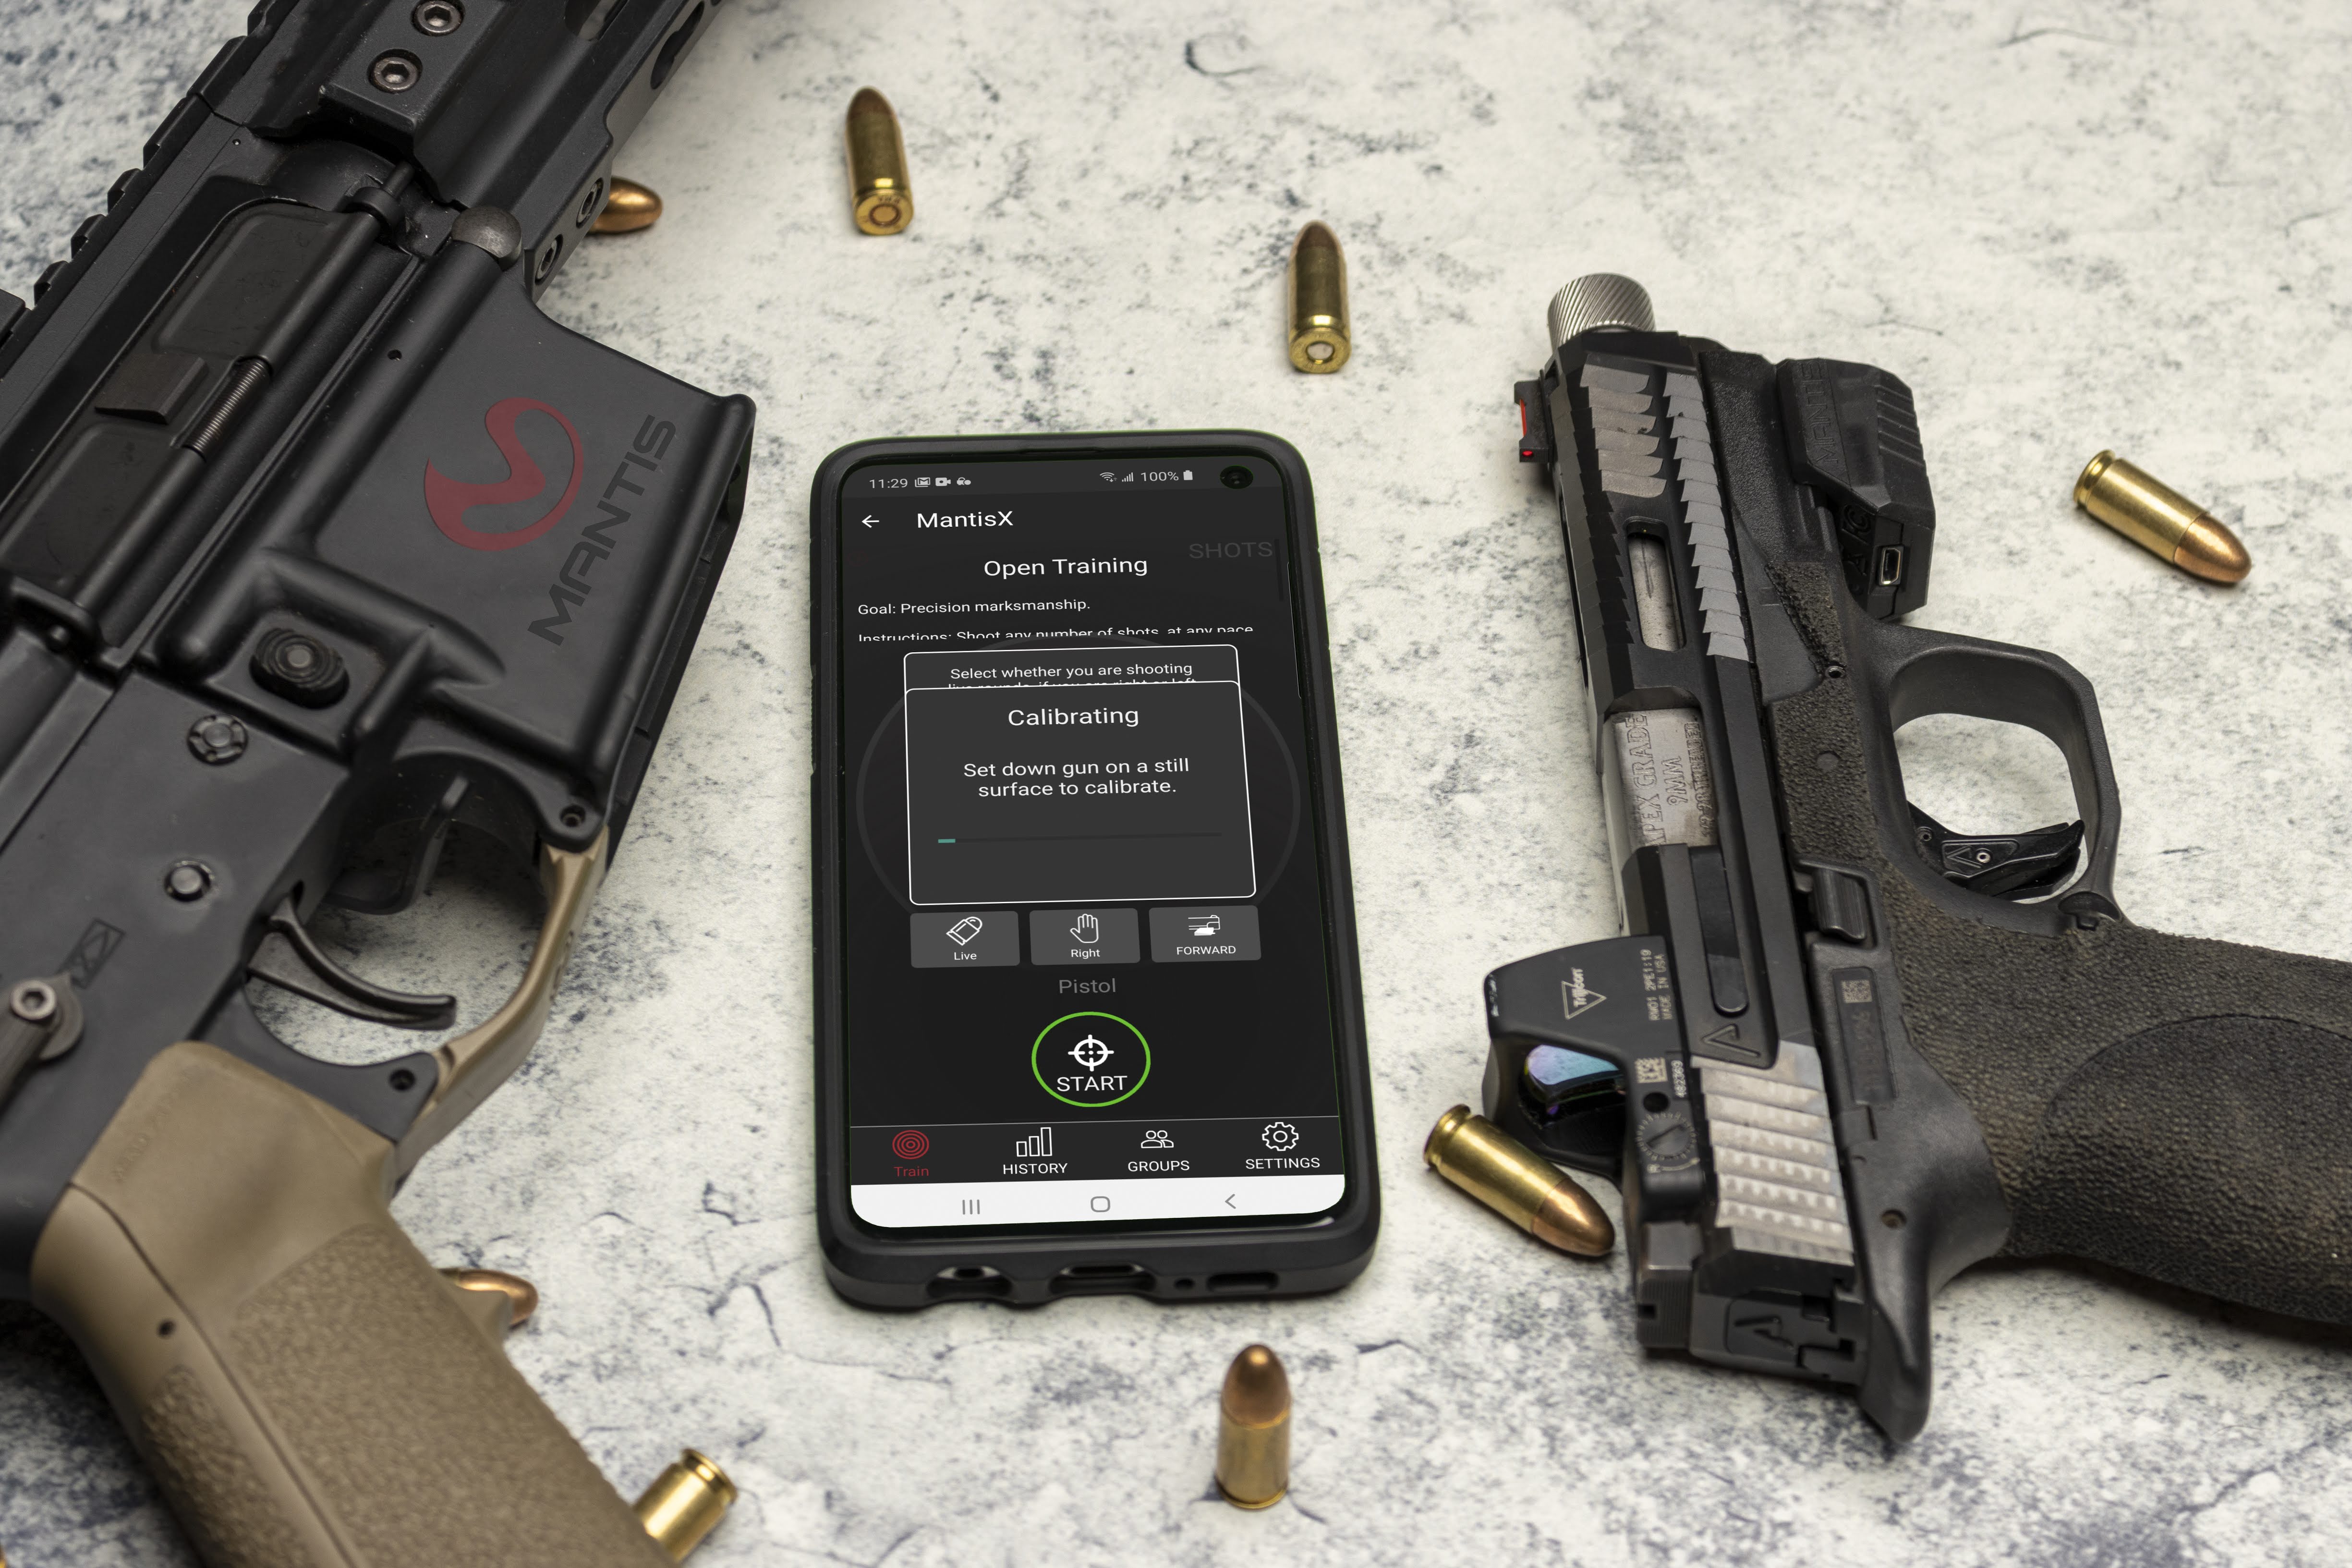 Mantis X 3 prefromice training system, live fire dryfire , rifle , pistol, shotgun , free app on Istore and Playstore 